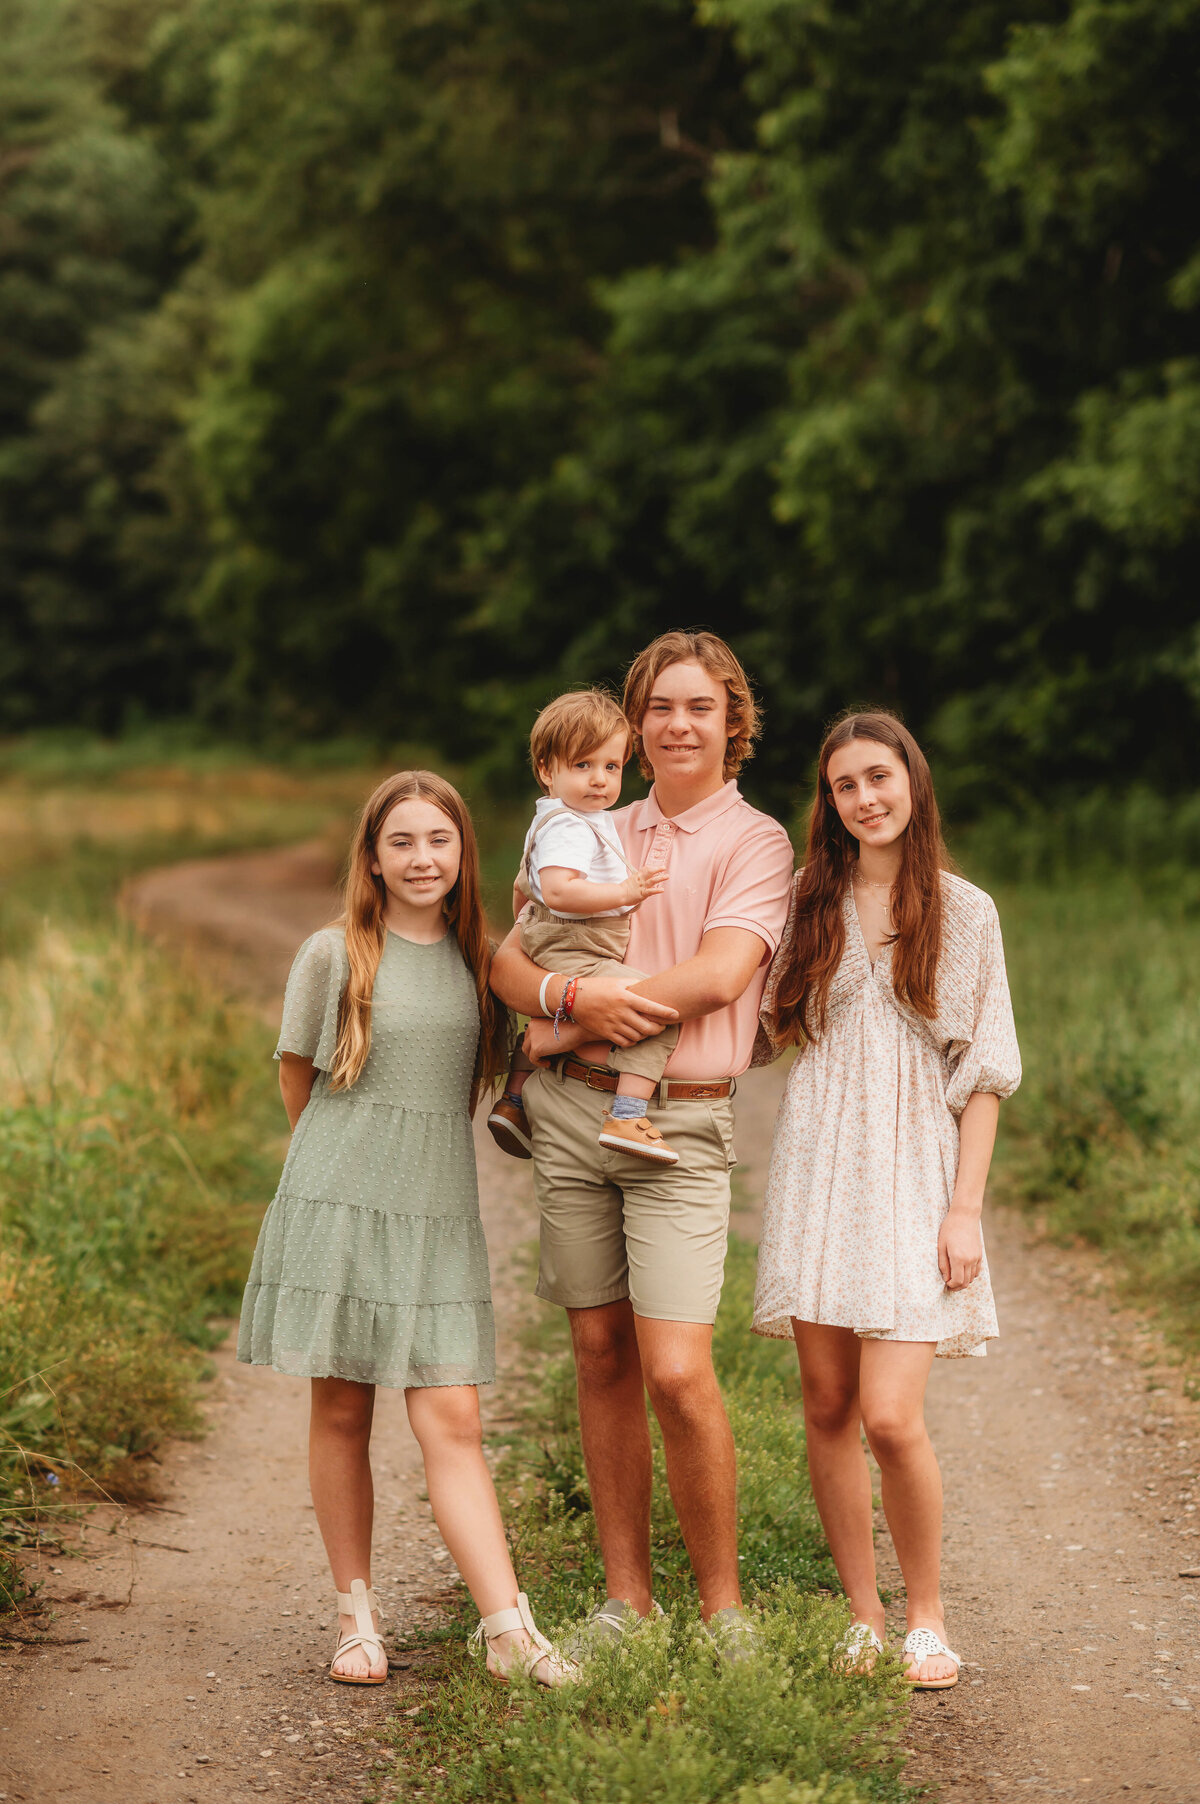 Siblings pose for Portraits during an Extended Family Photoshoot in Asheville, NC.